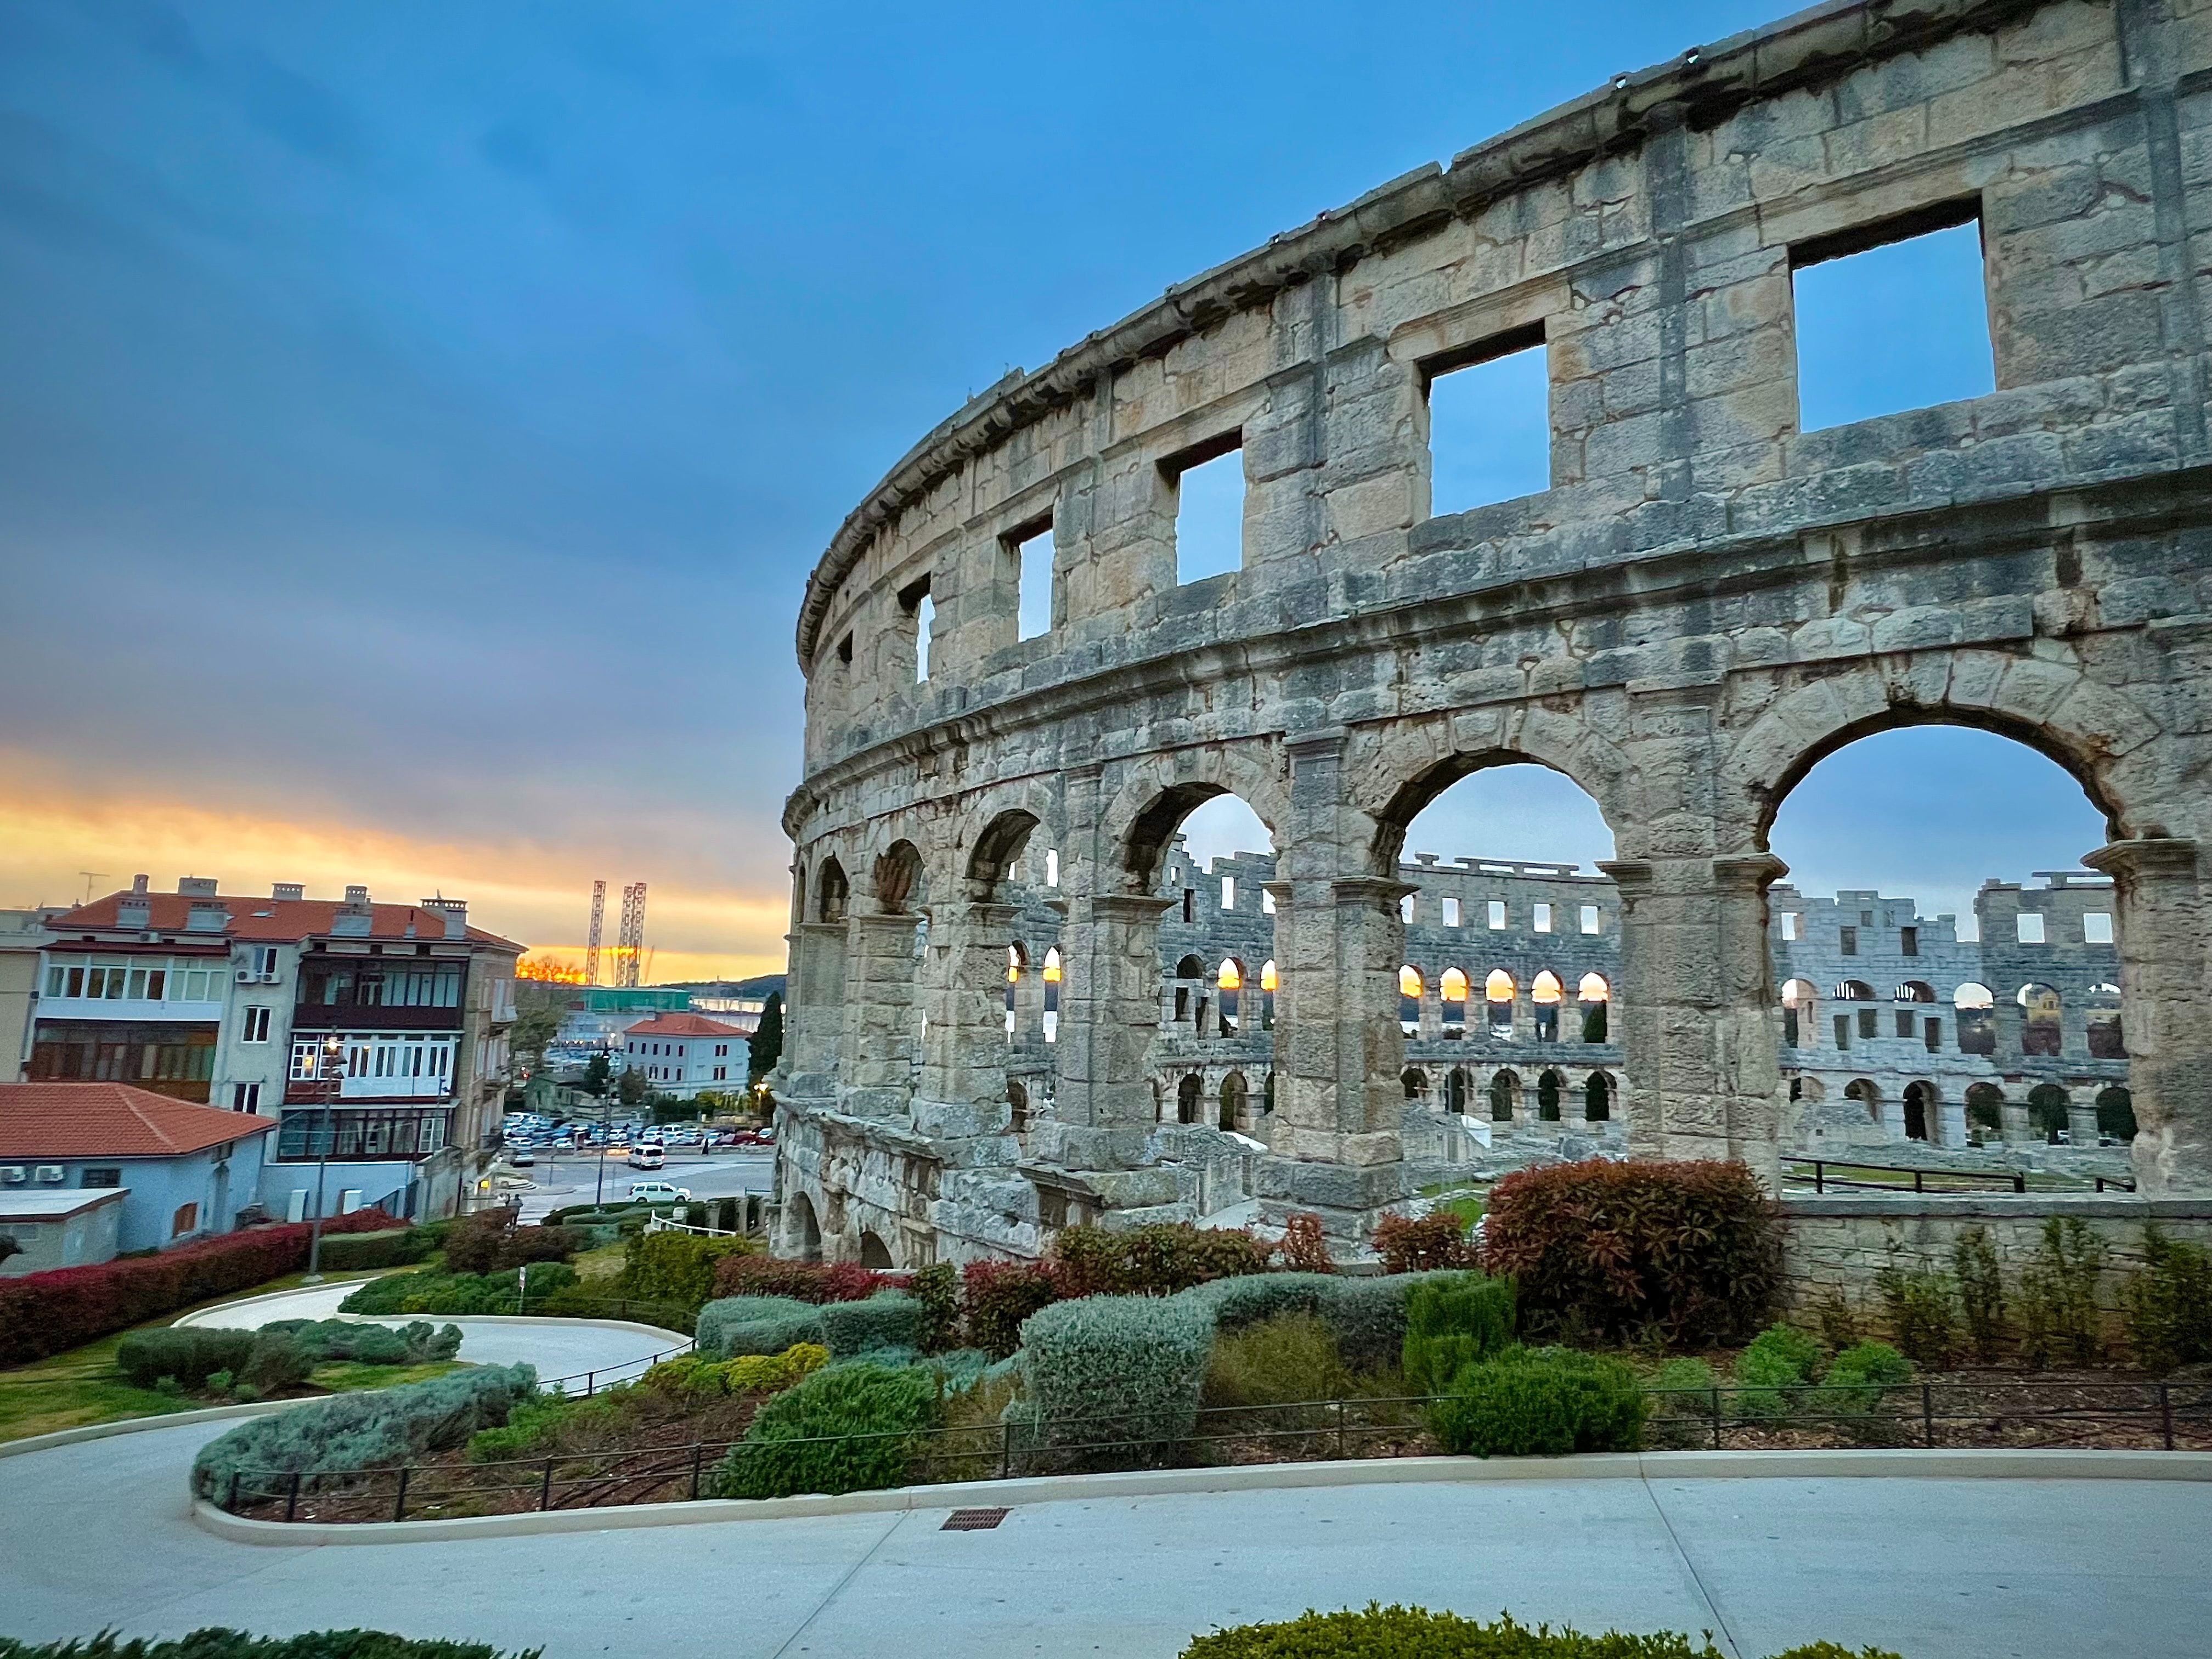 Arena – Amphitheater in Pula